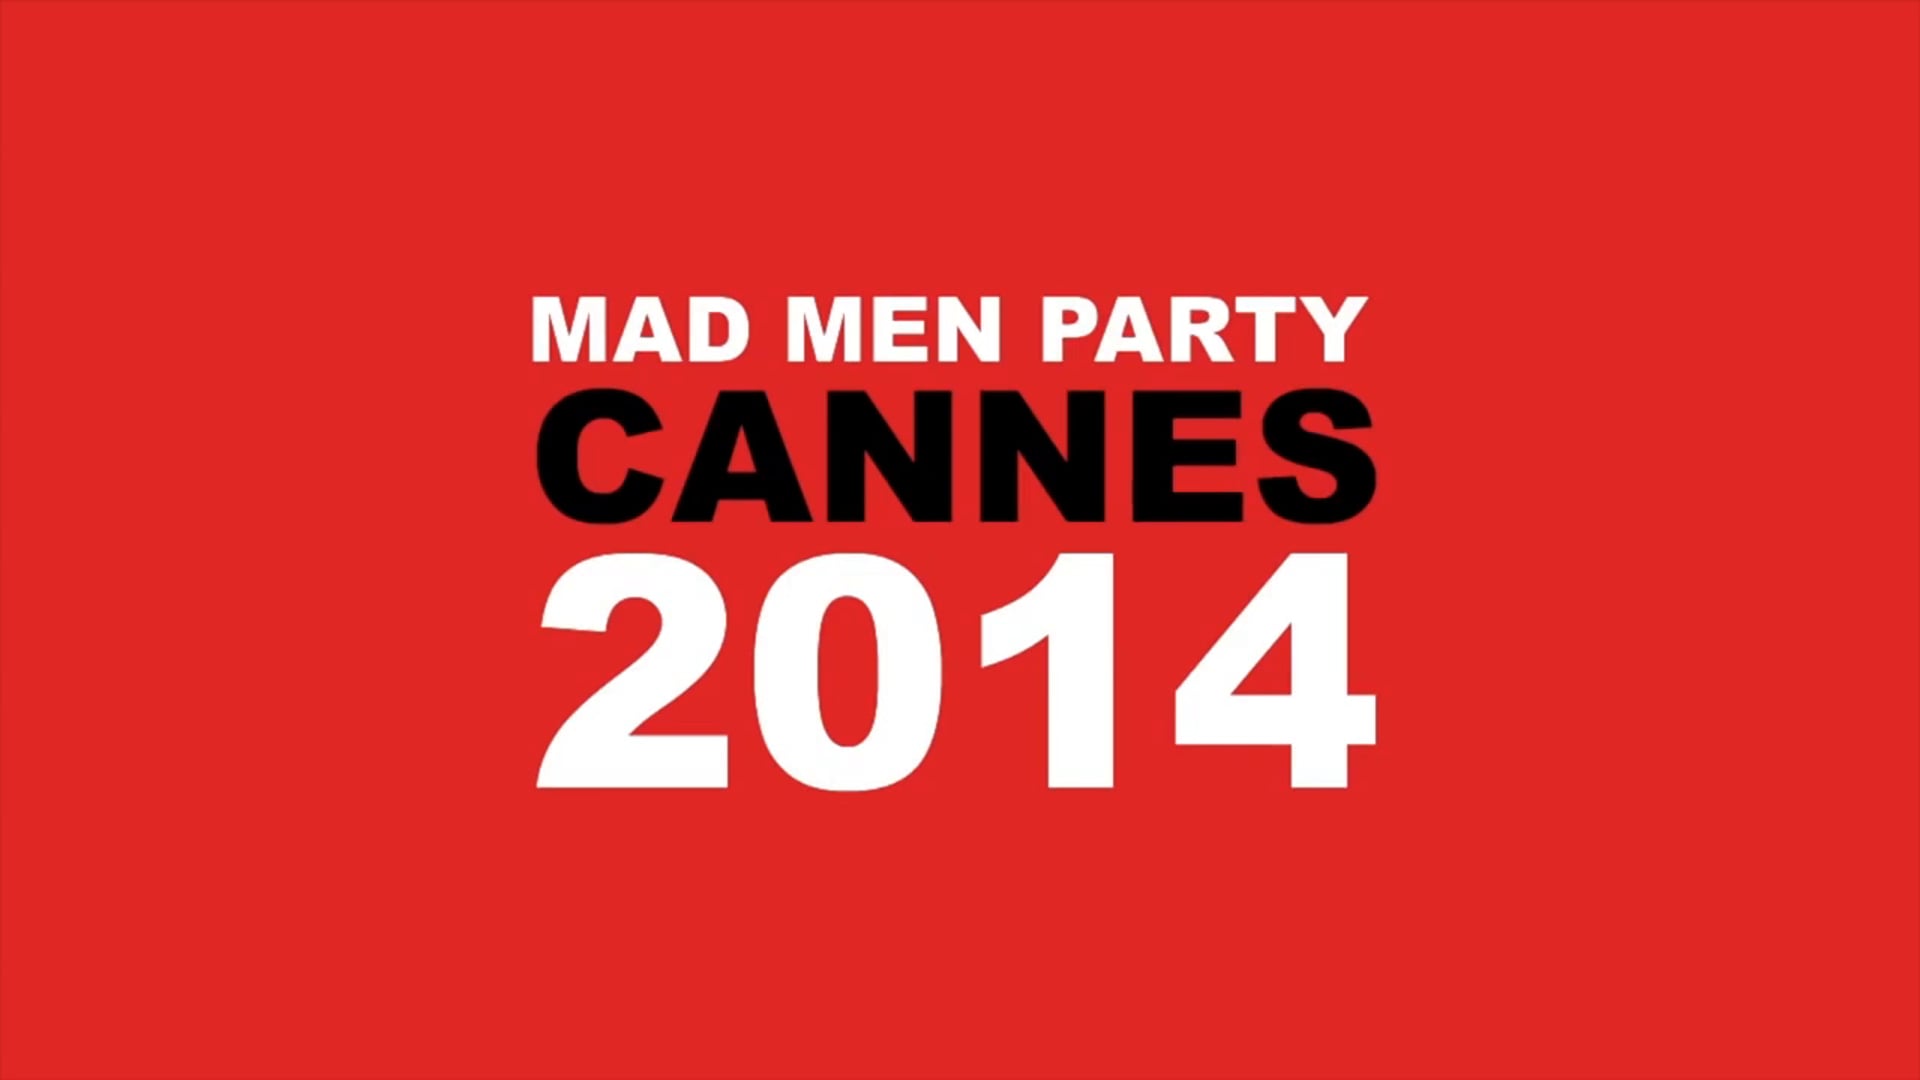 Cannes Mad Men Party 